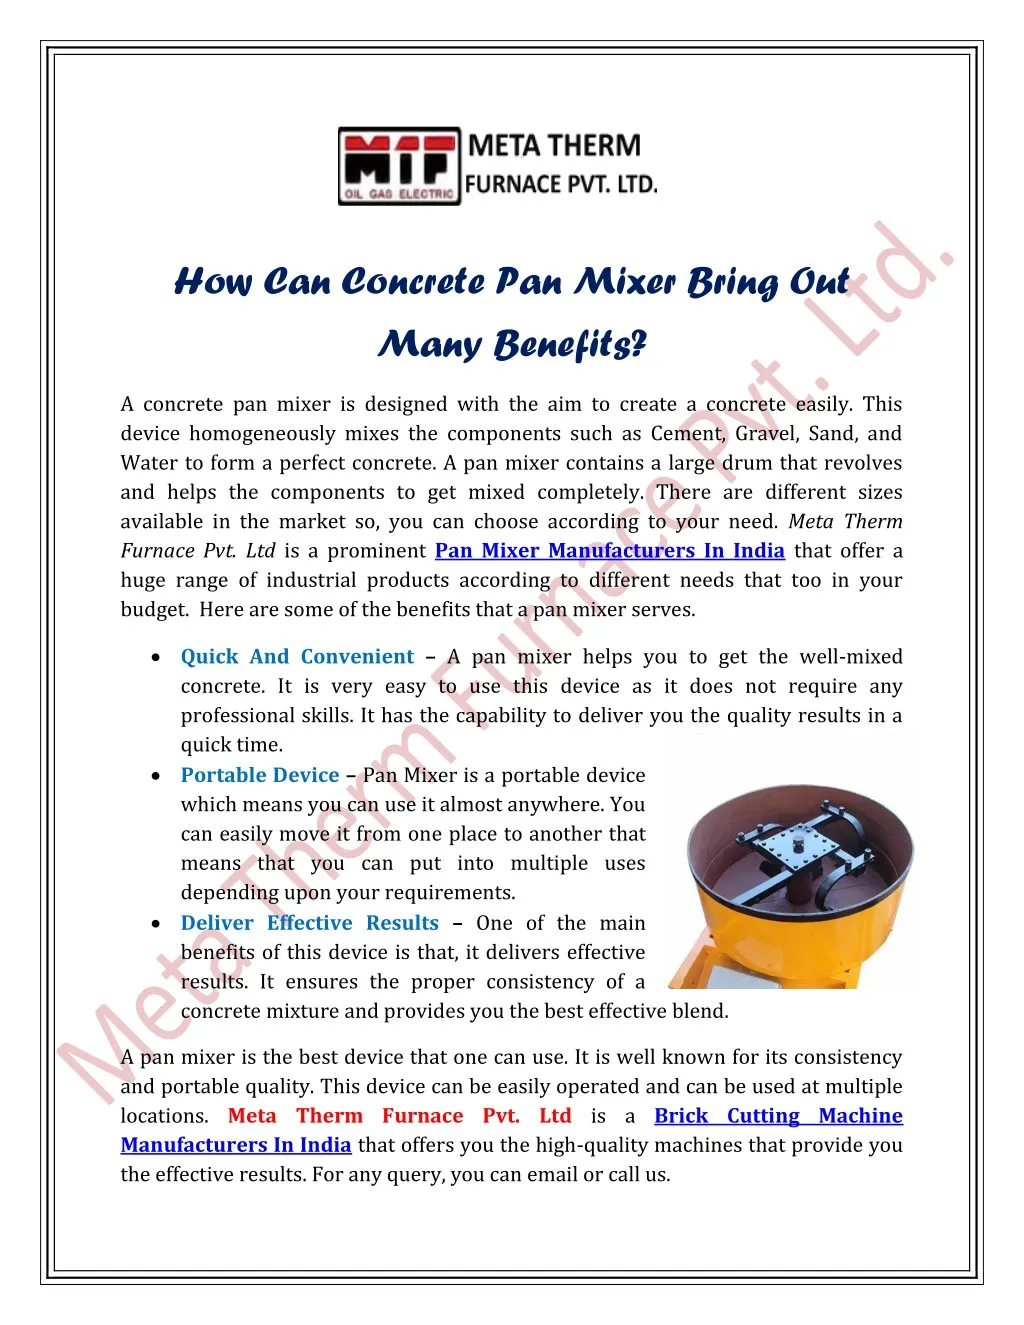 how can concrete pan mixer bring out many benefits